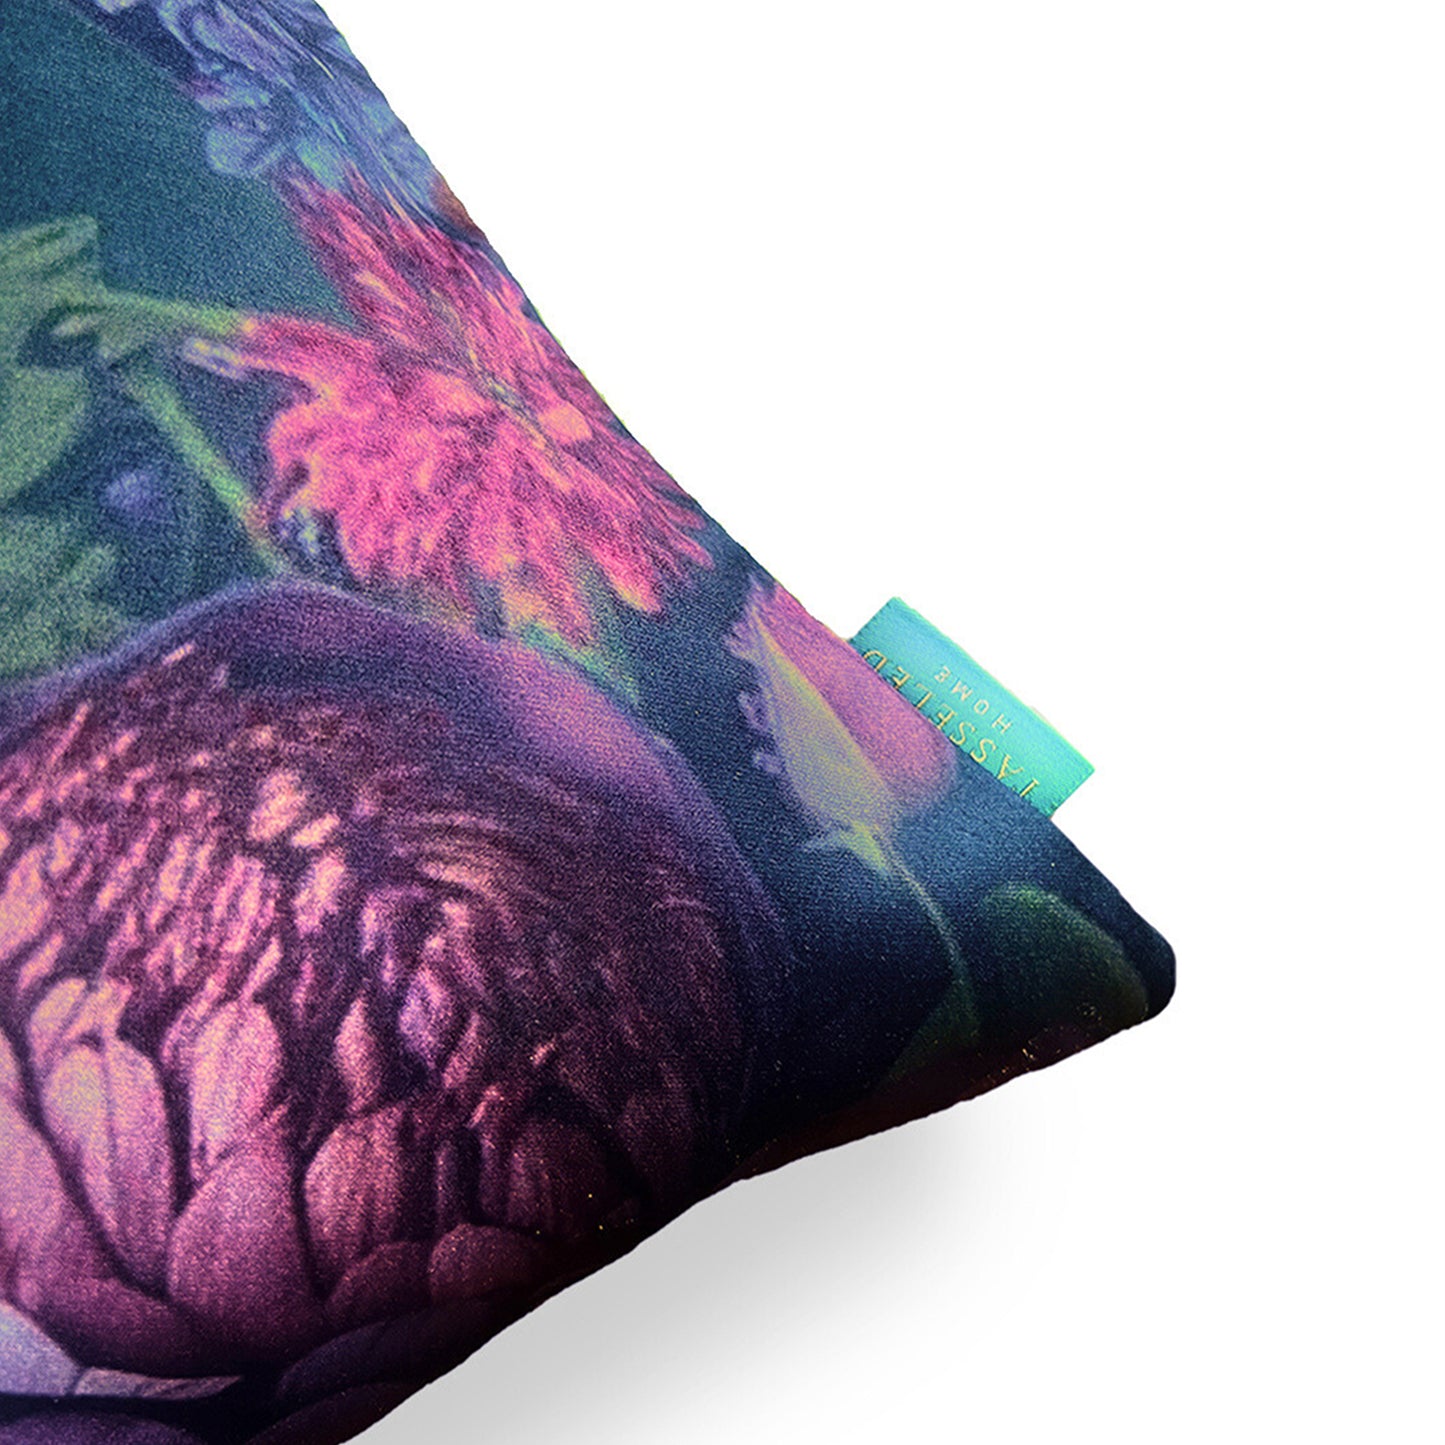 Floral Five Cushion Covers